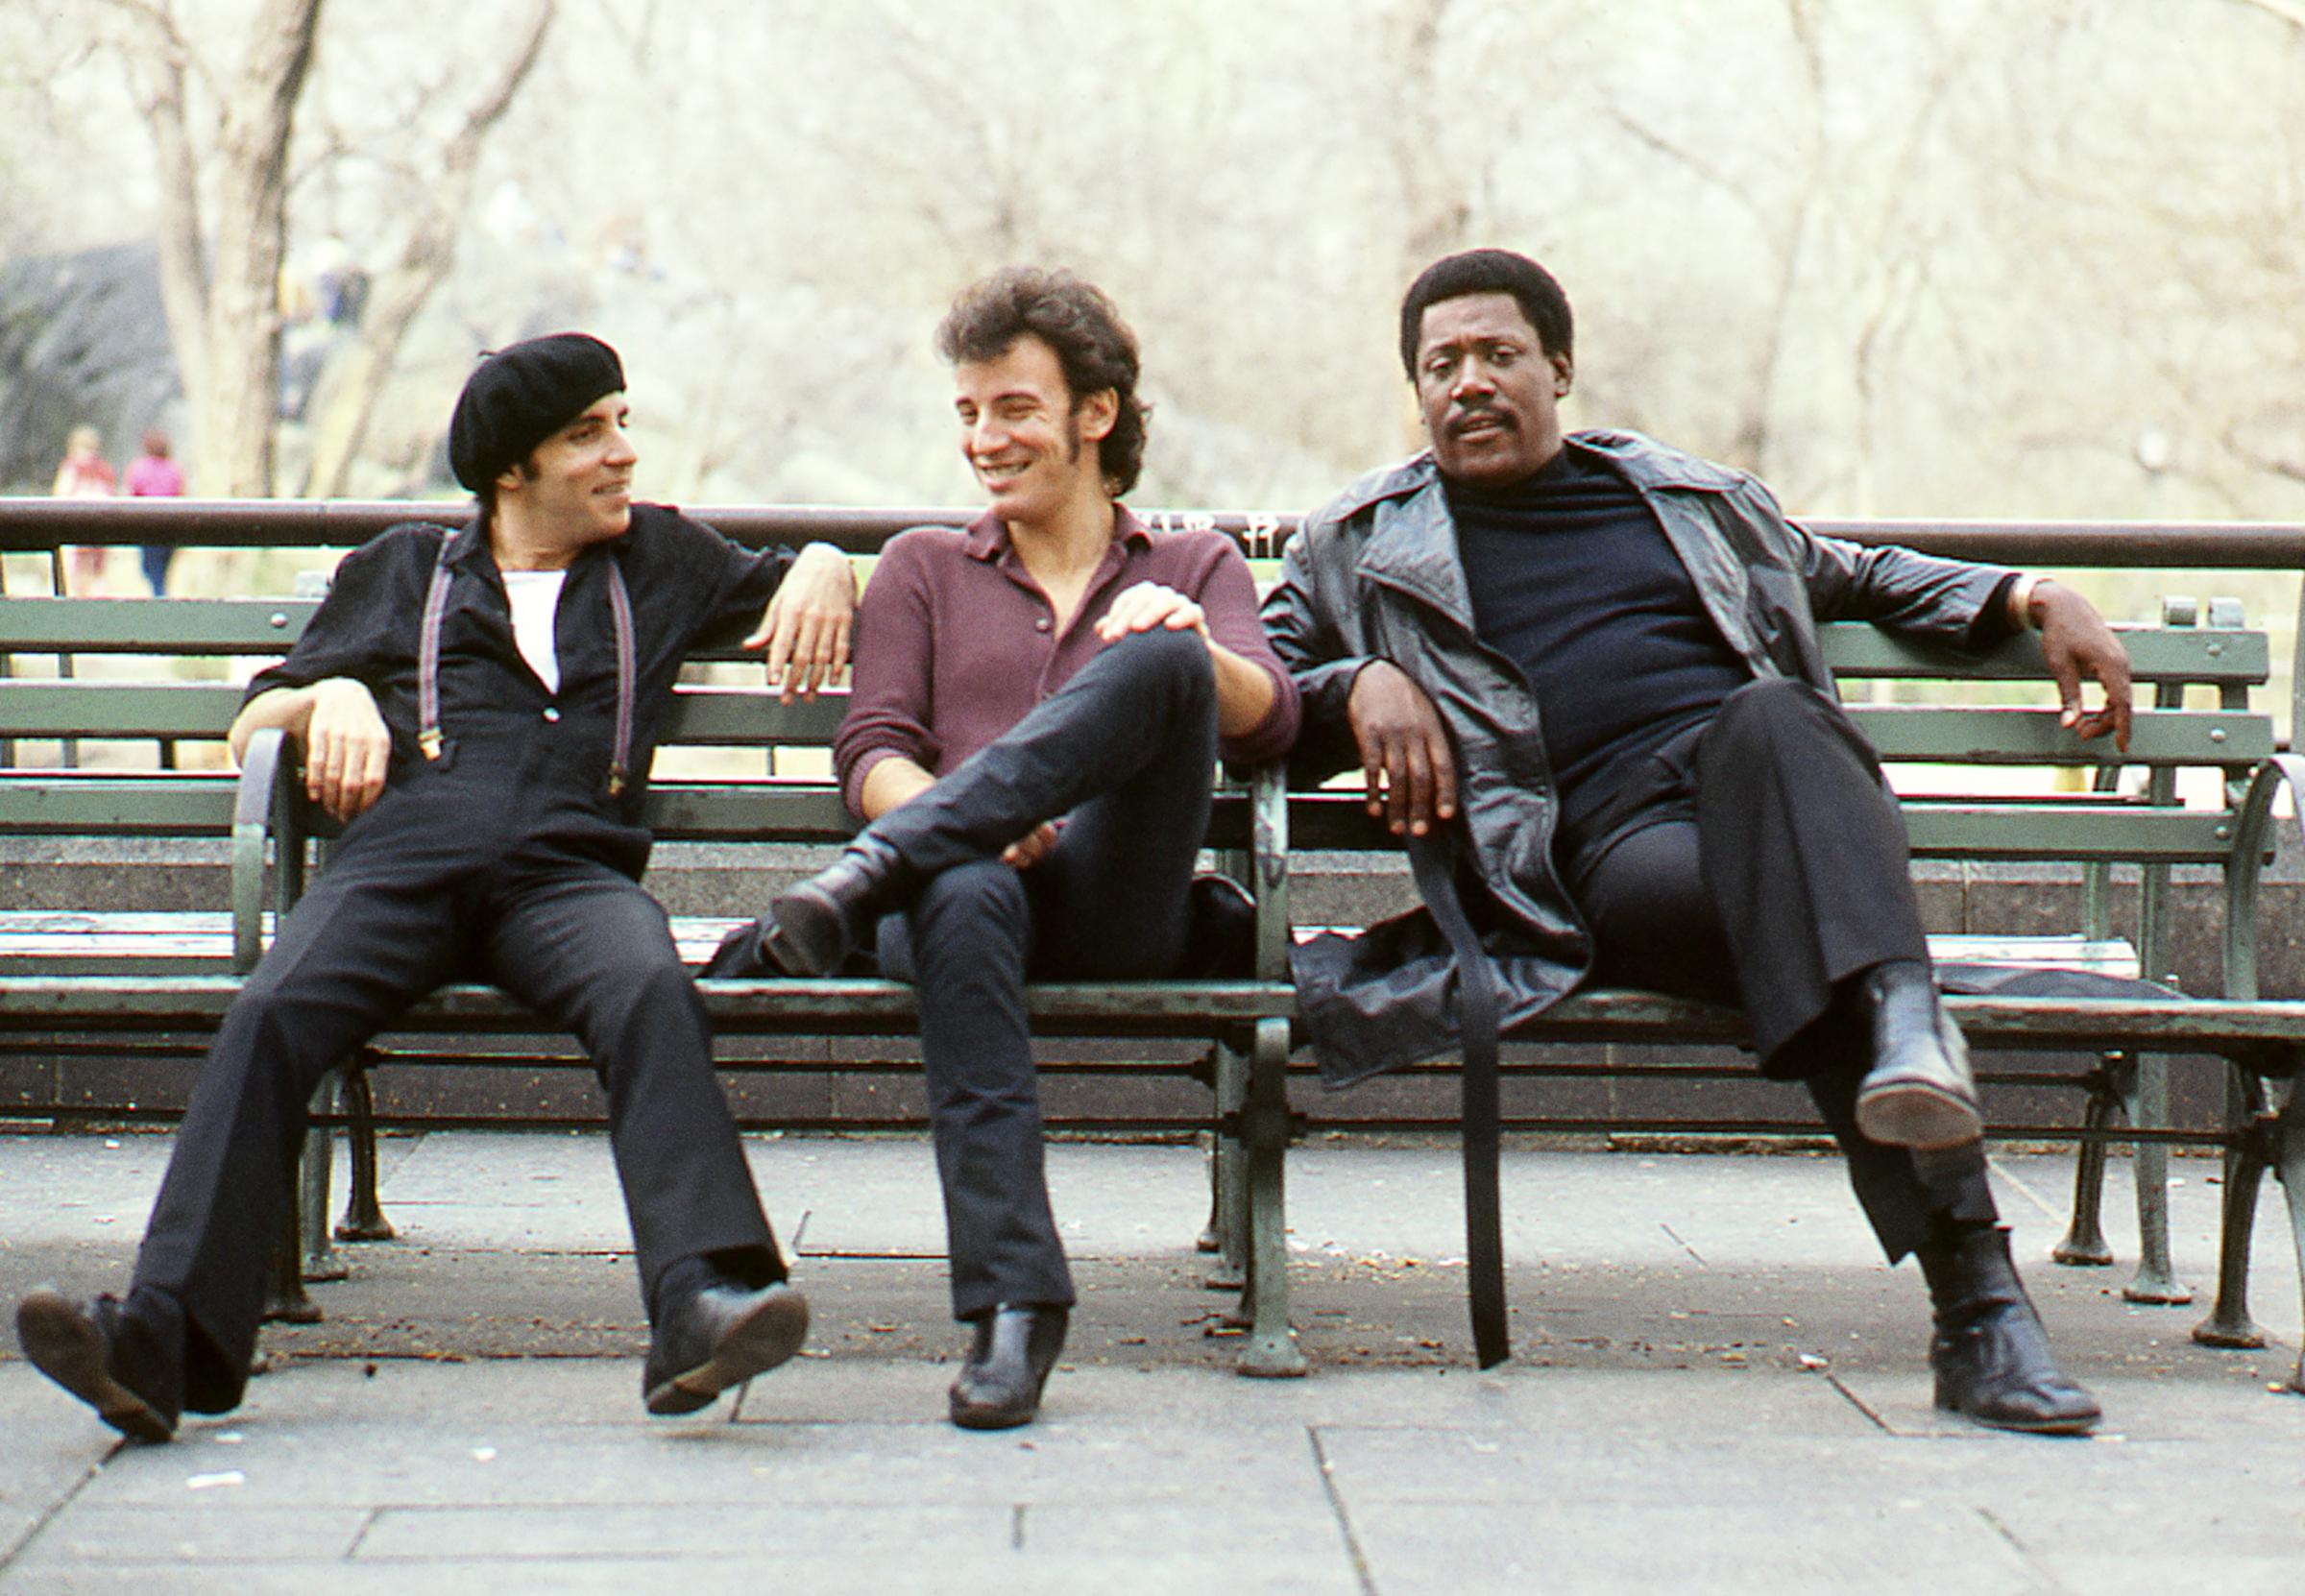 From left: "Little Steven" Van Zandt, Bruce Springsteen and Clarence Clemons are seen on a bench in Central Park in New York City in Aug. 1979.